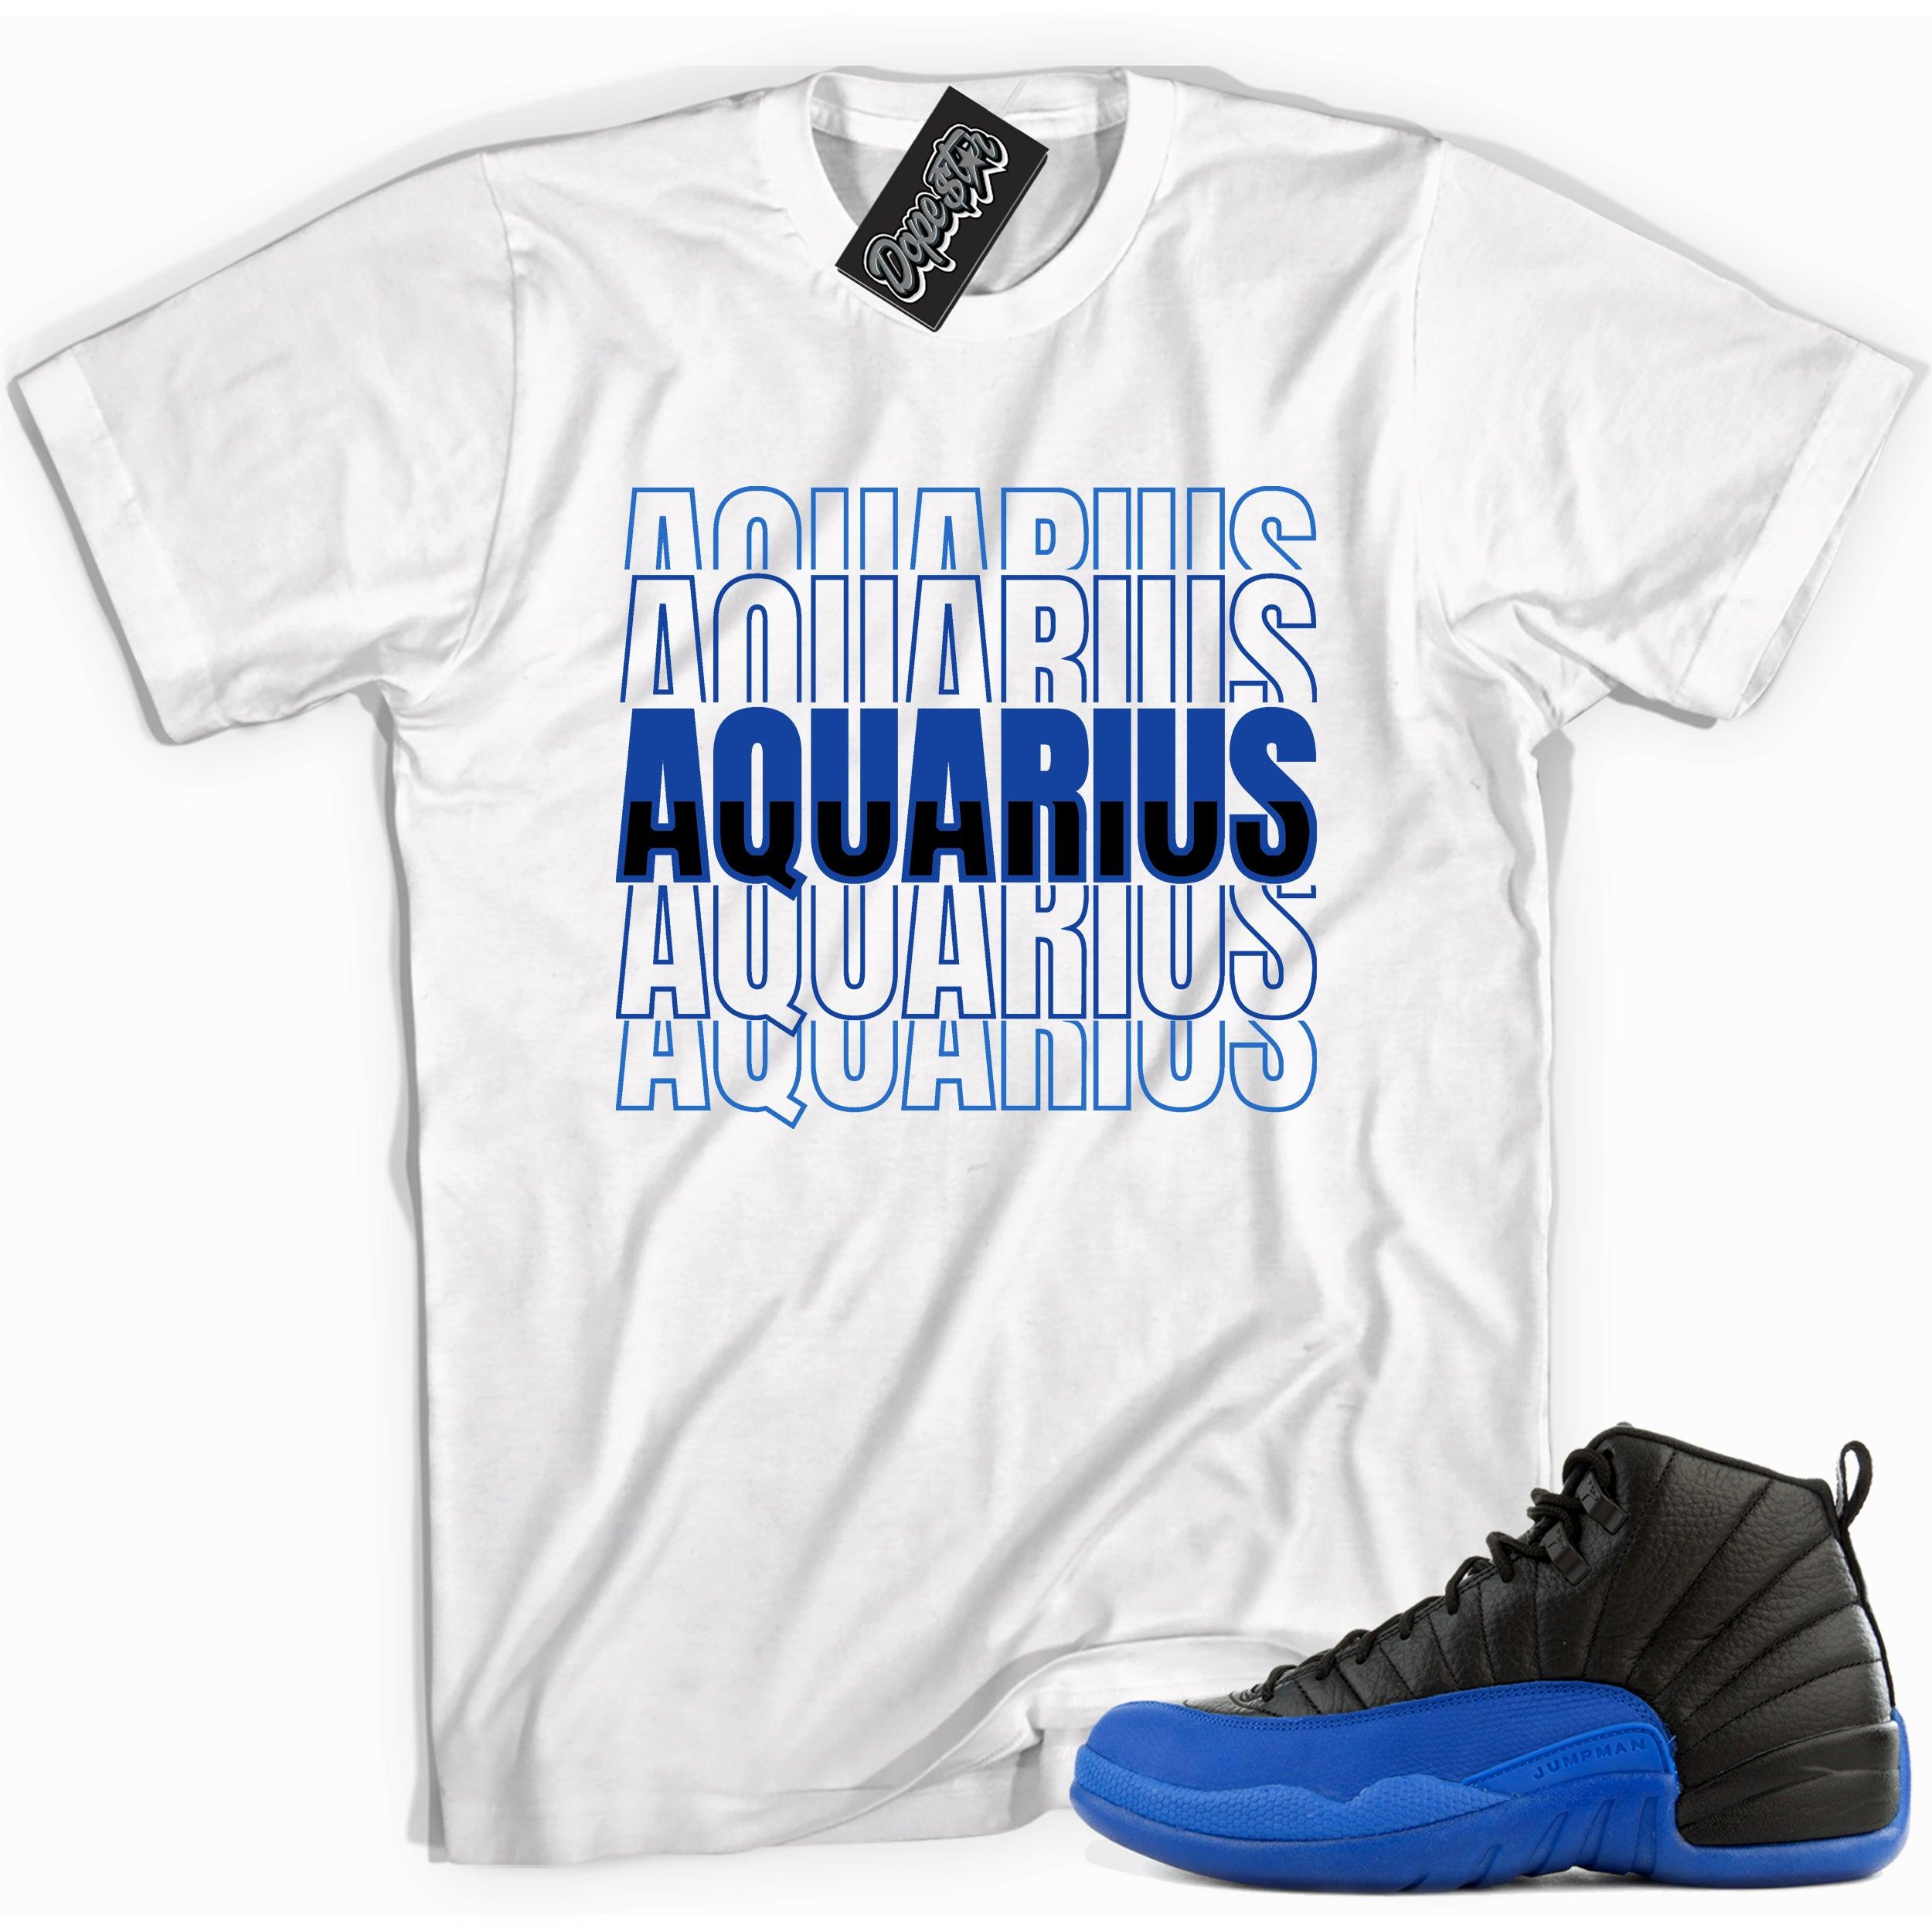 Cool white graphic tee with 'aquarius' print, that perfectly matches Air Jordan 12 Retro Black Game Royal sneakers.